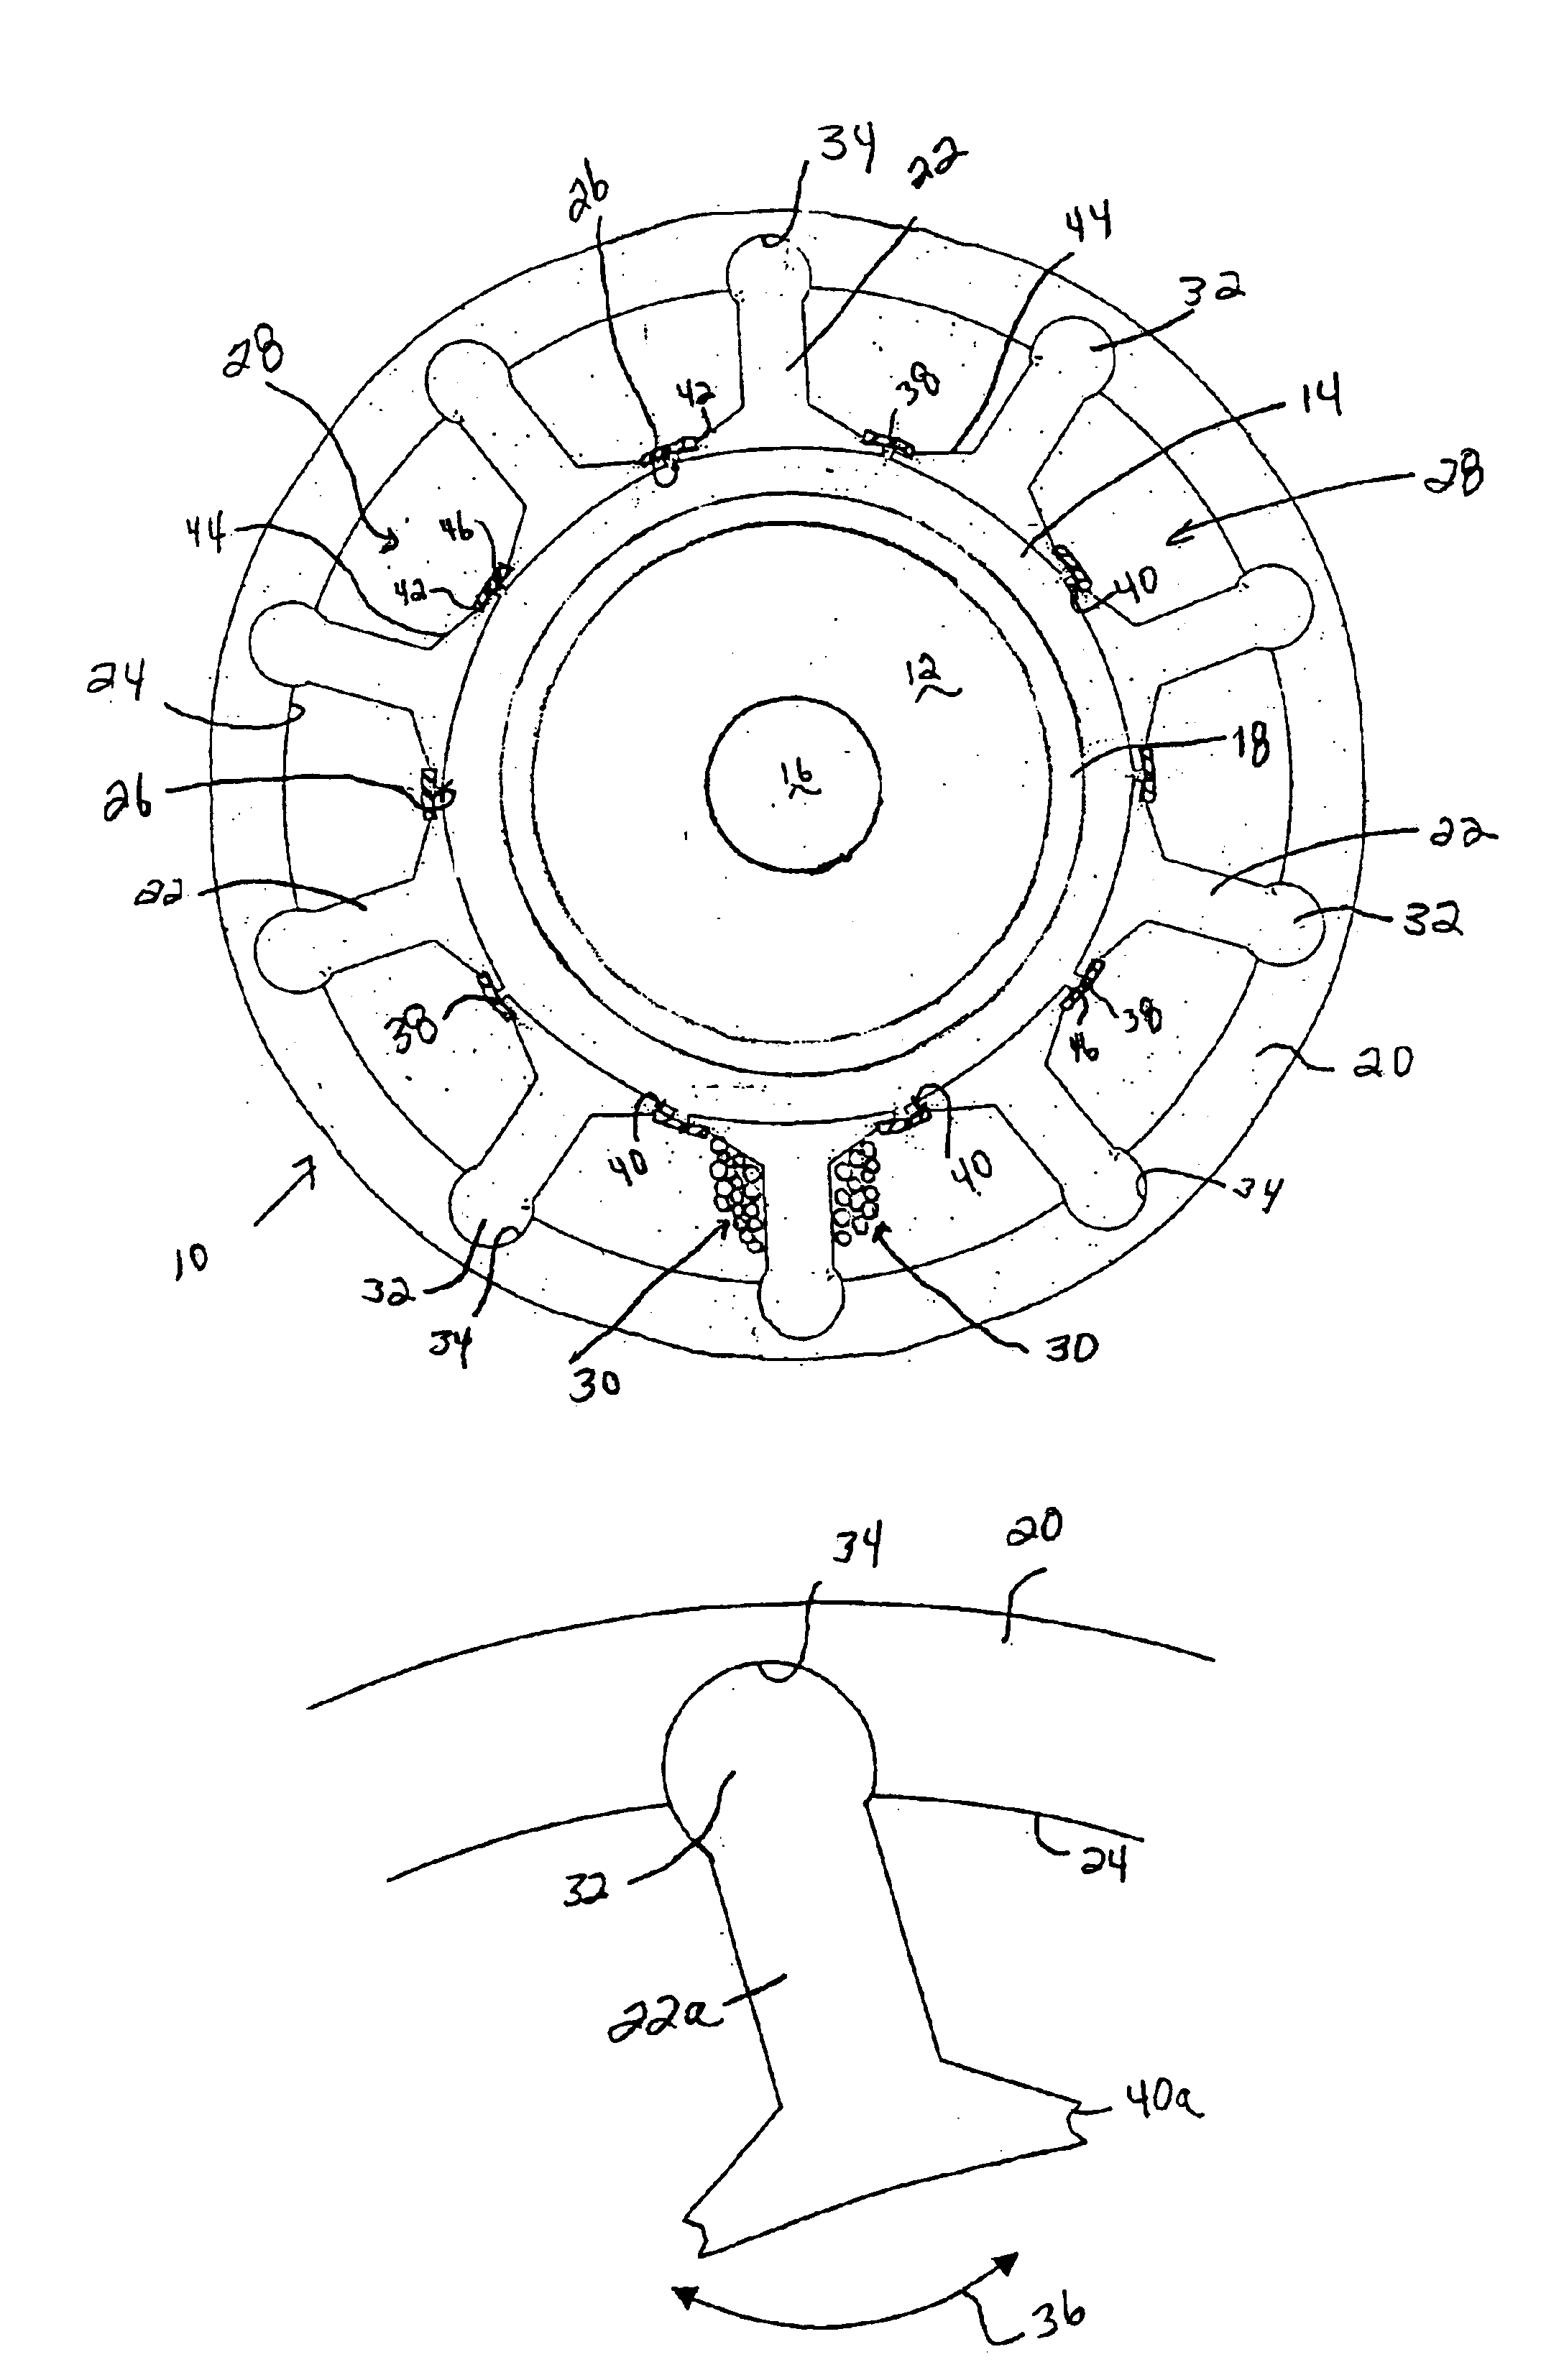 Stator design for permanent magnet motor with combination slot wedge and tooth locator